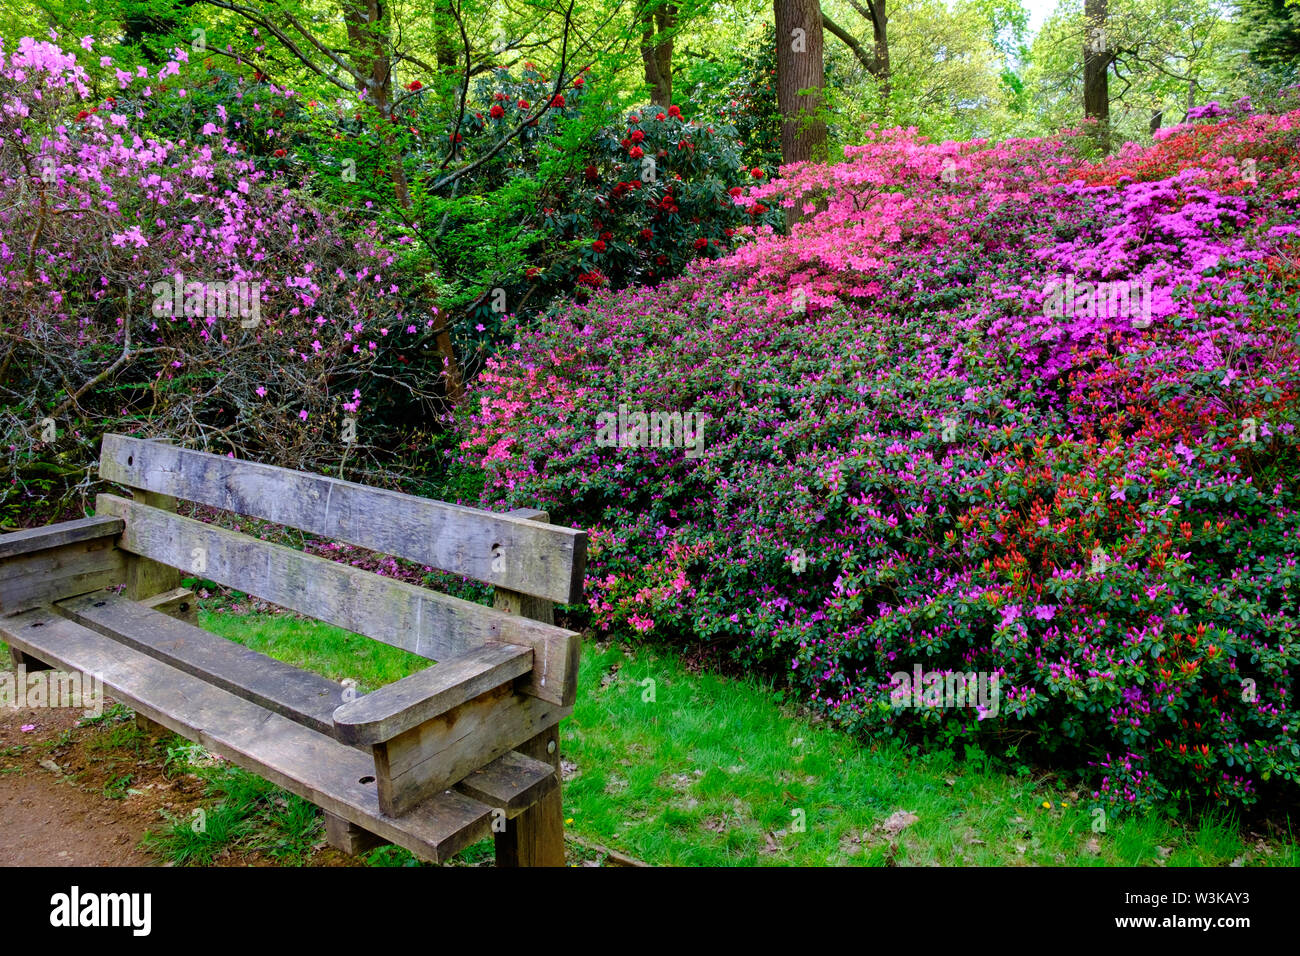 A wooden bench and bushes of pink and purple spring flowers, Isabella Plantation, Richmond Park, Surrey, England UK Stock Photo